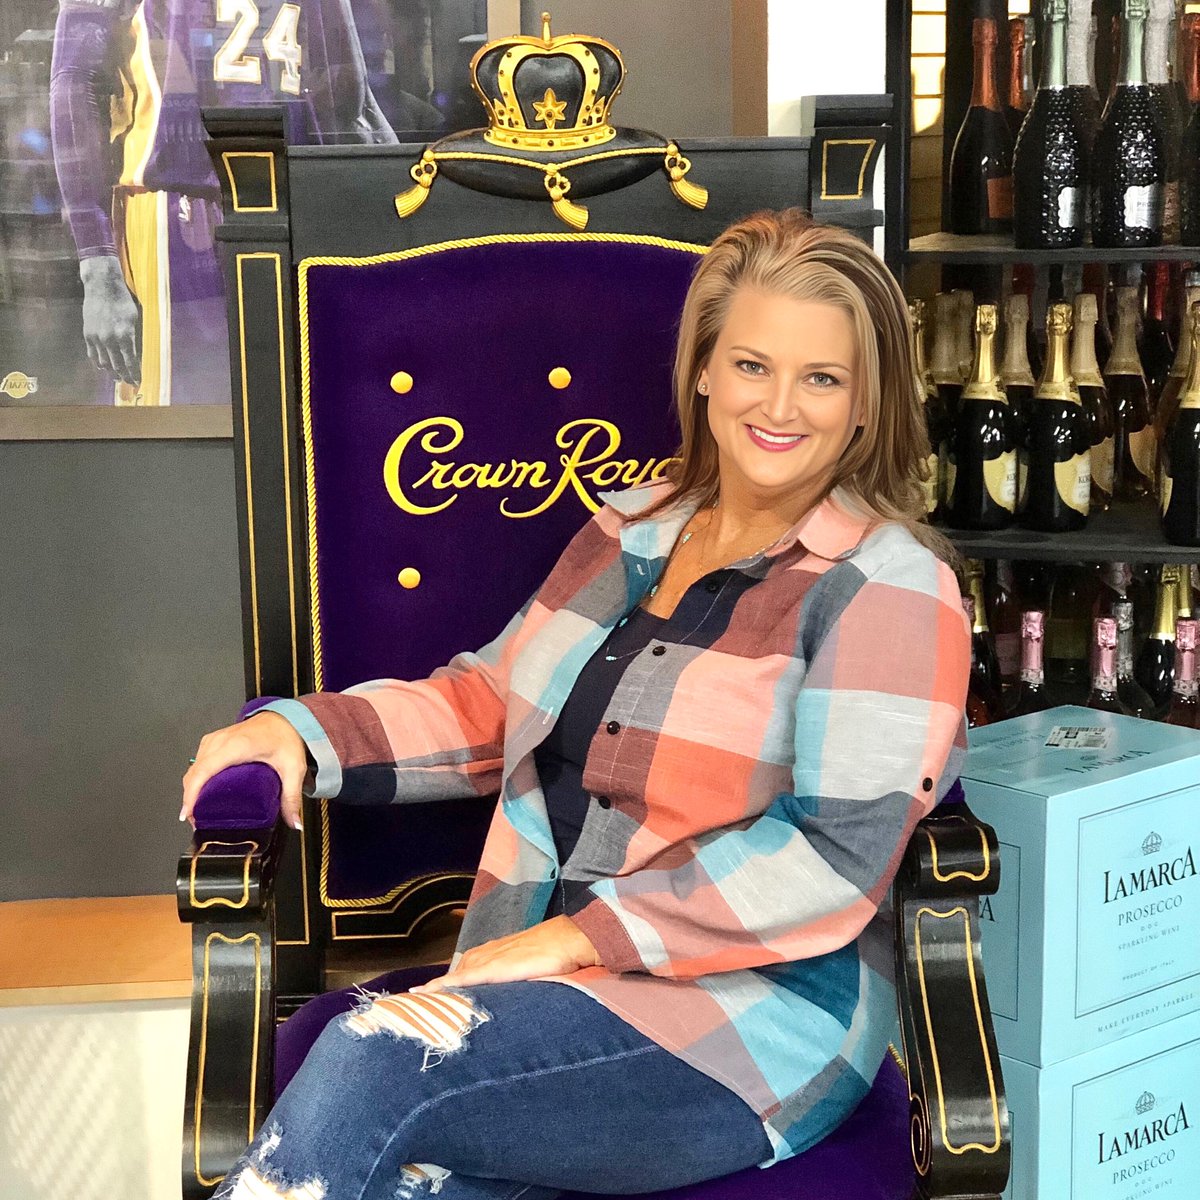 The Queen Sits On Her Throne… 
#crownroyal #whiskey #canadianwhiskey #shenanigans #queen #throne #royalty #wine #shopping #atl #weekend #weplaytoomuch #stonemountain #atlanta #georgia